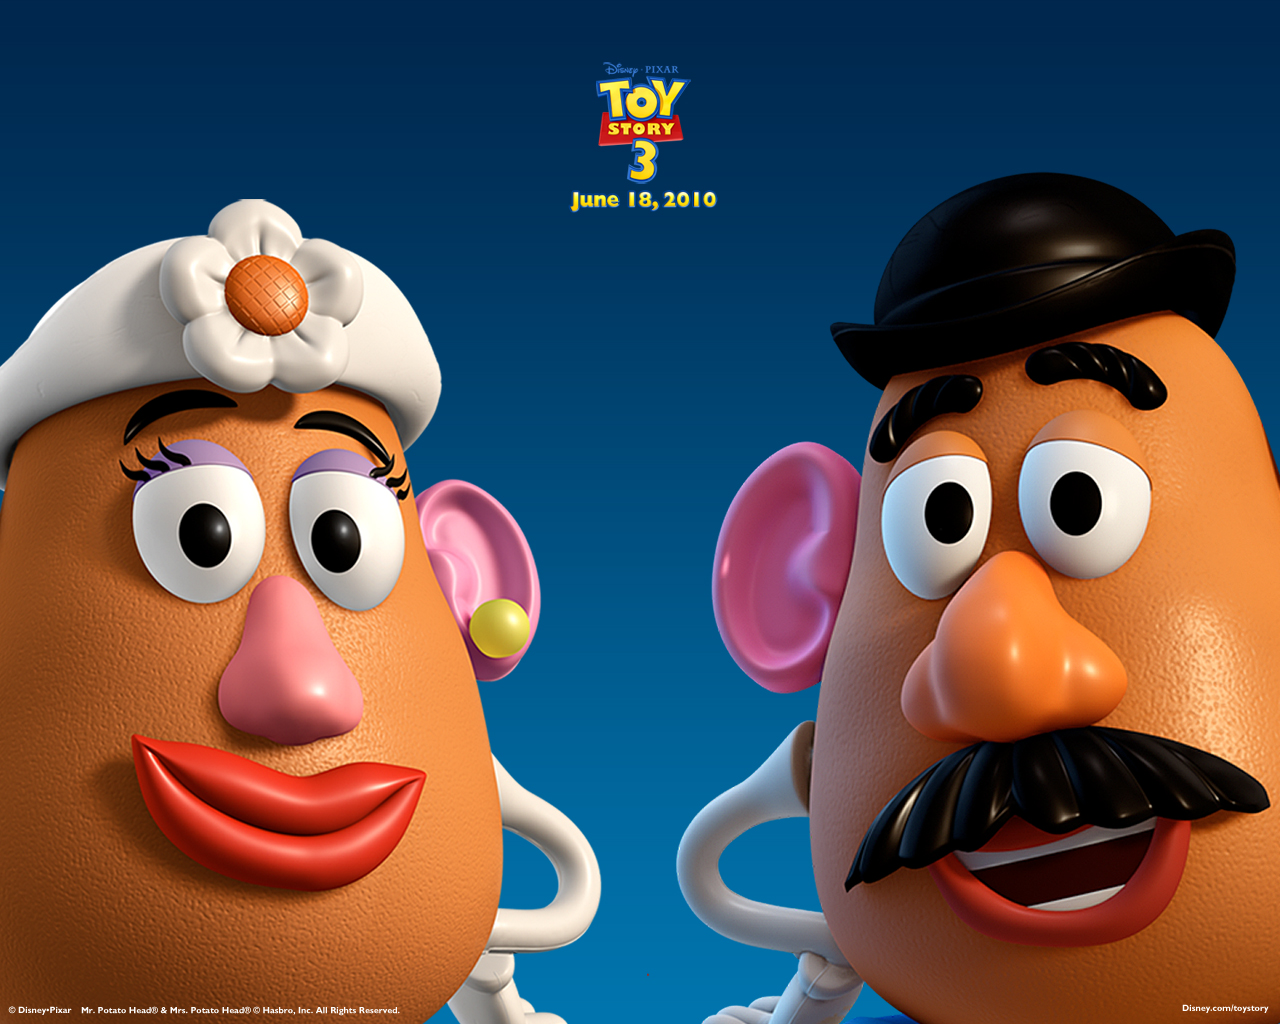 Toy Story 3 Wallpaper Number 7 (1280 x 1024 Pixels)